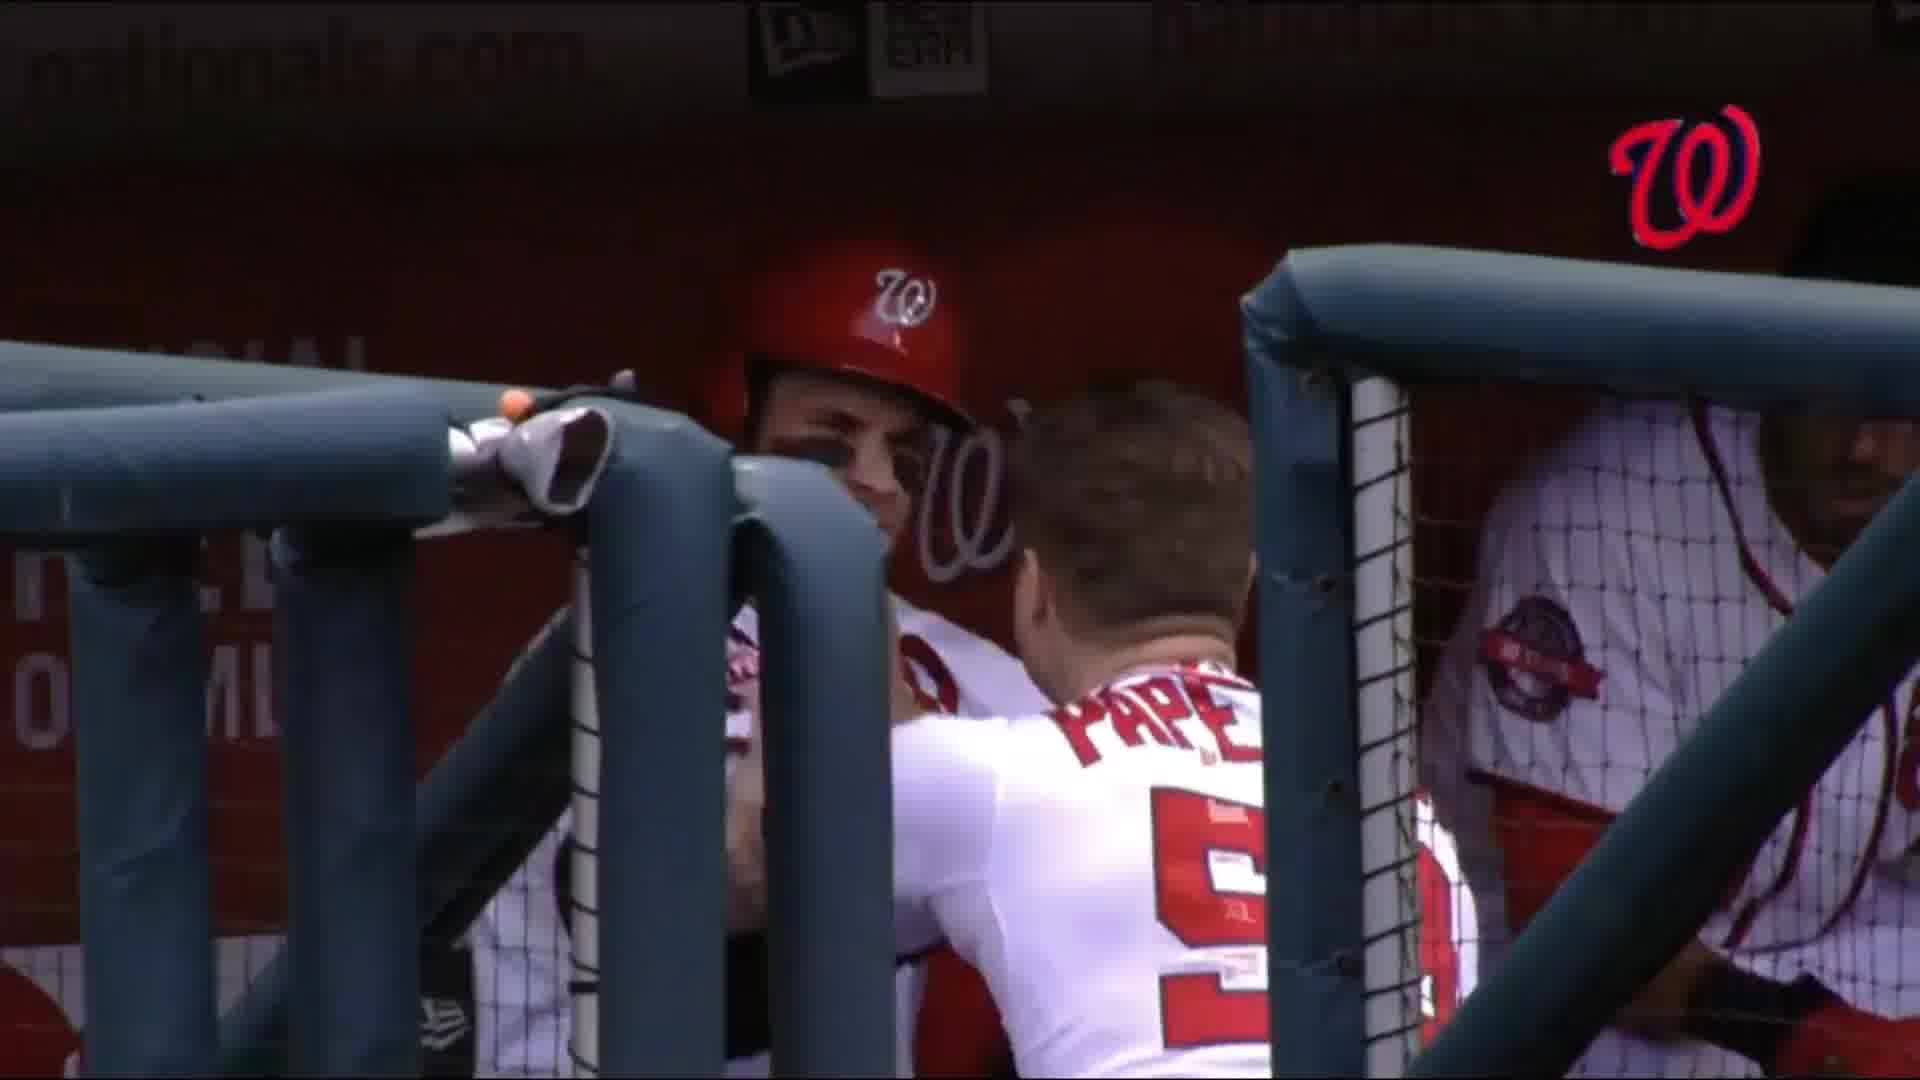 1920x1080 Jonathan Papelbon Suspended 4 Games, But Bryce Harper Shares Blame for  Dugout Fight